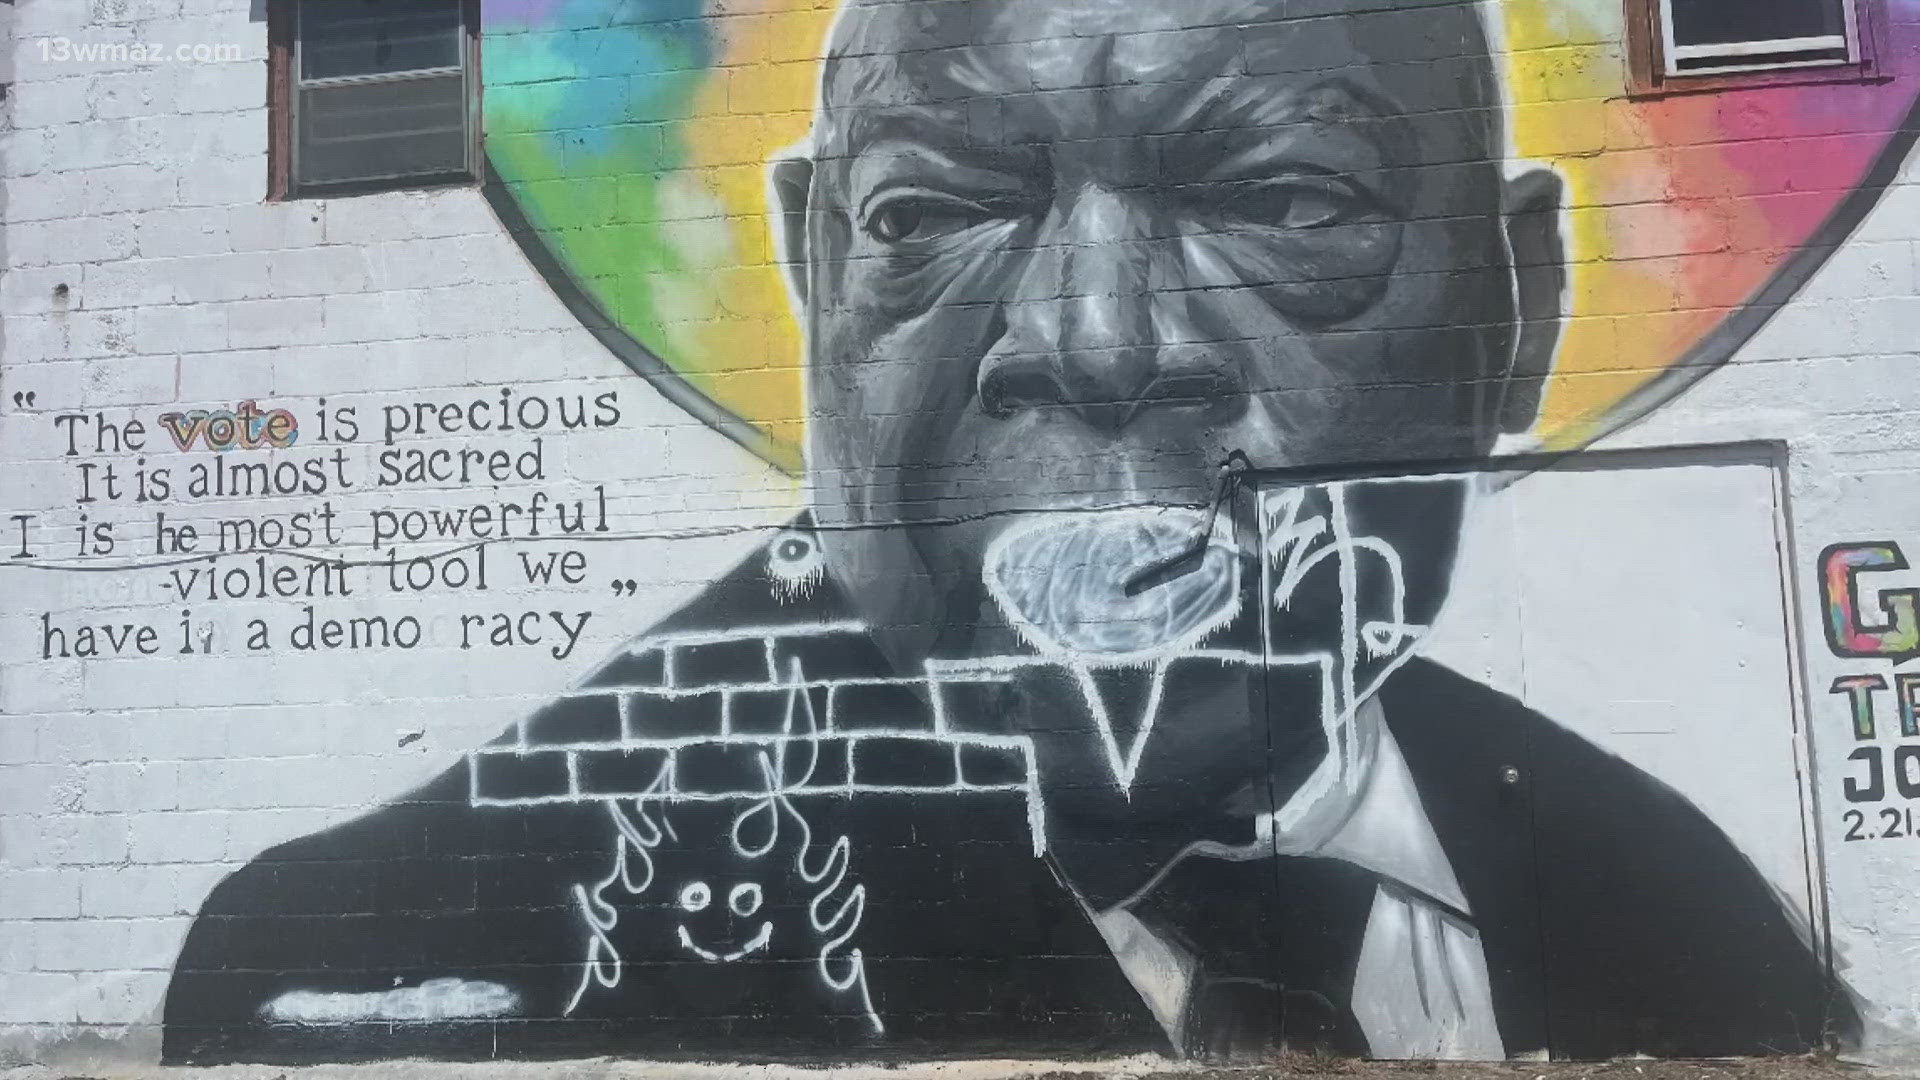 The mural depicted the late John Lewis, a civil rights activist and who represented Georgia in Congress for over 30 years.